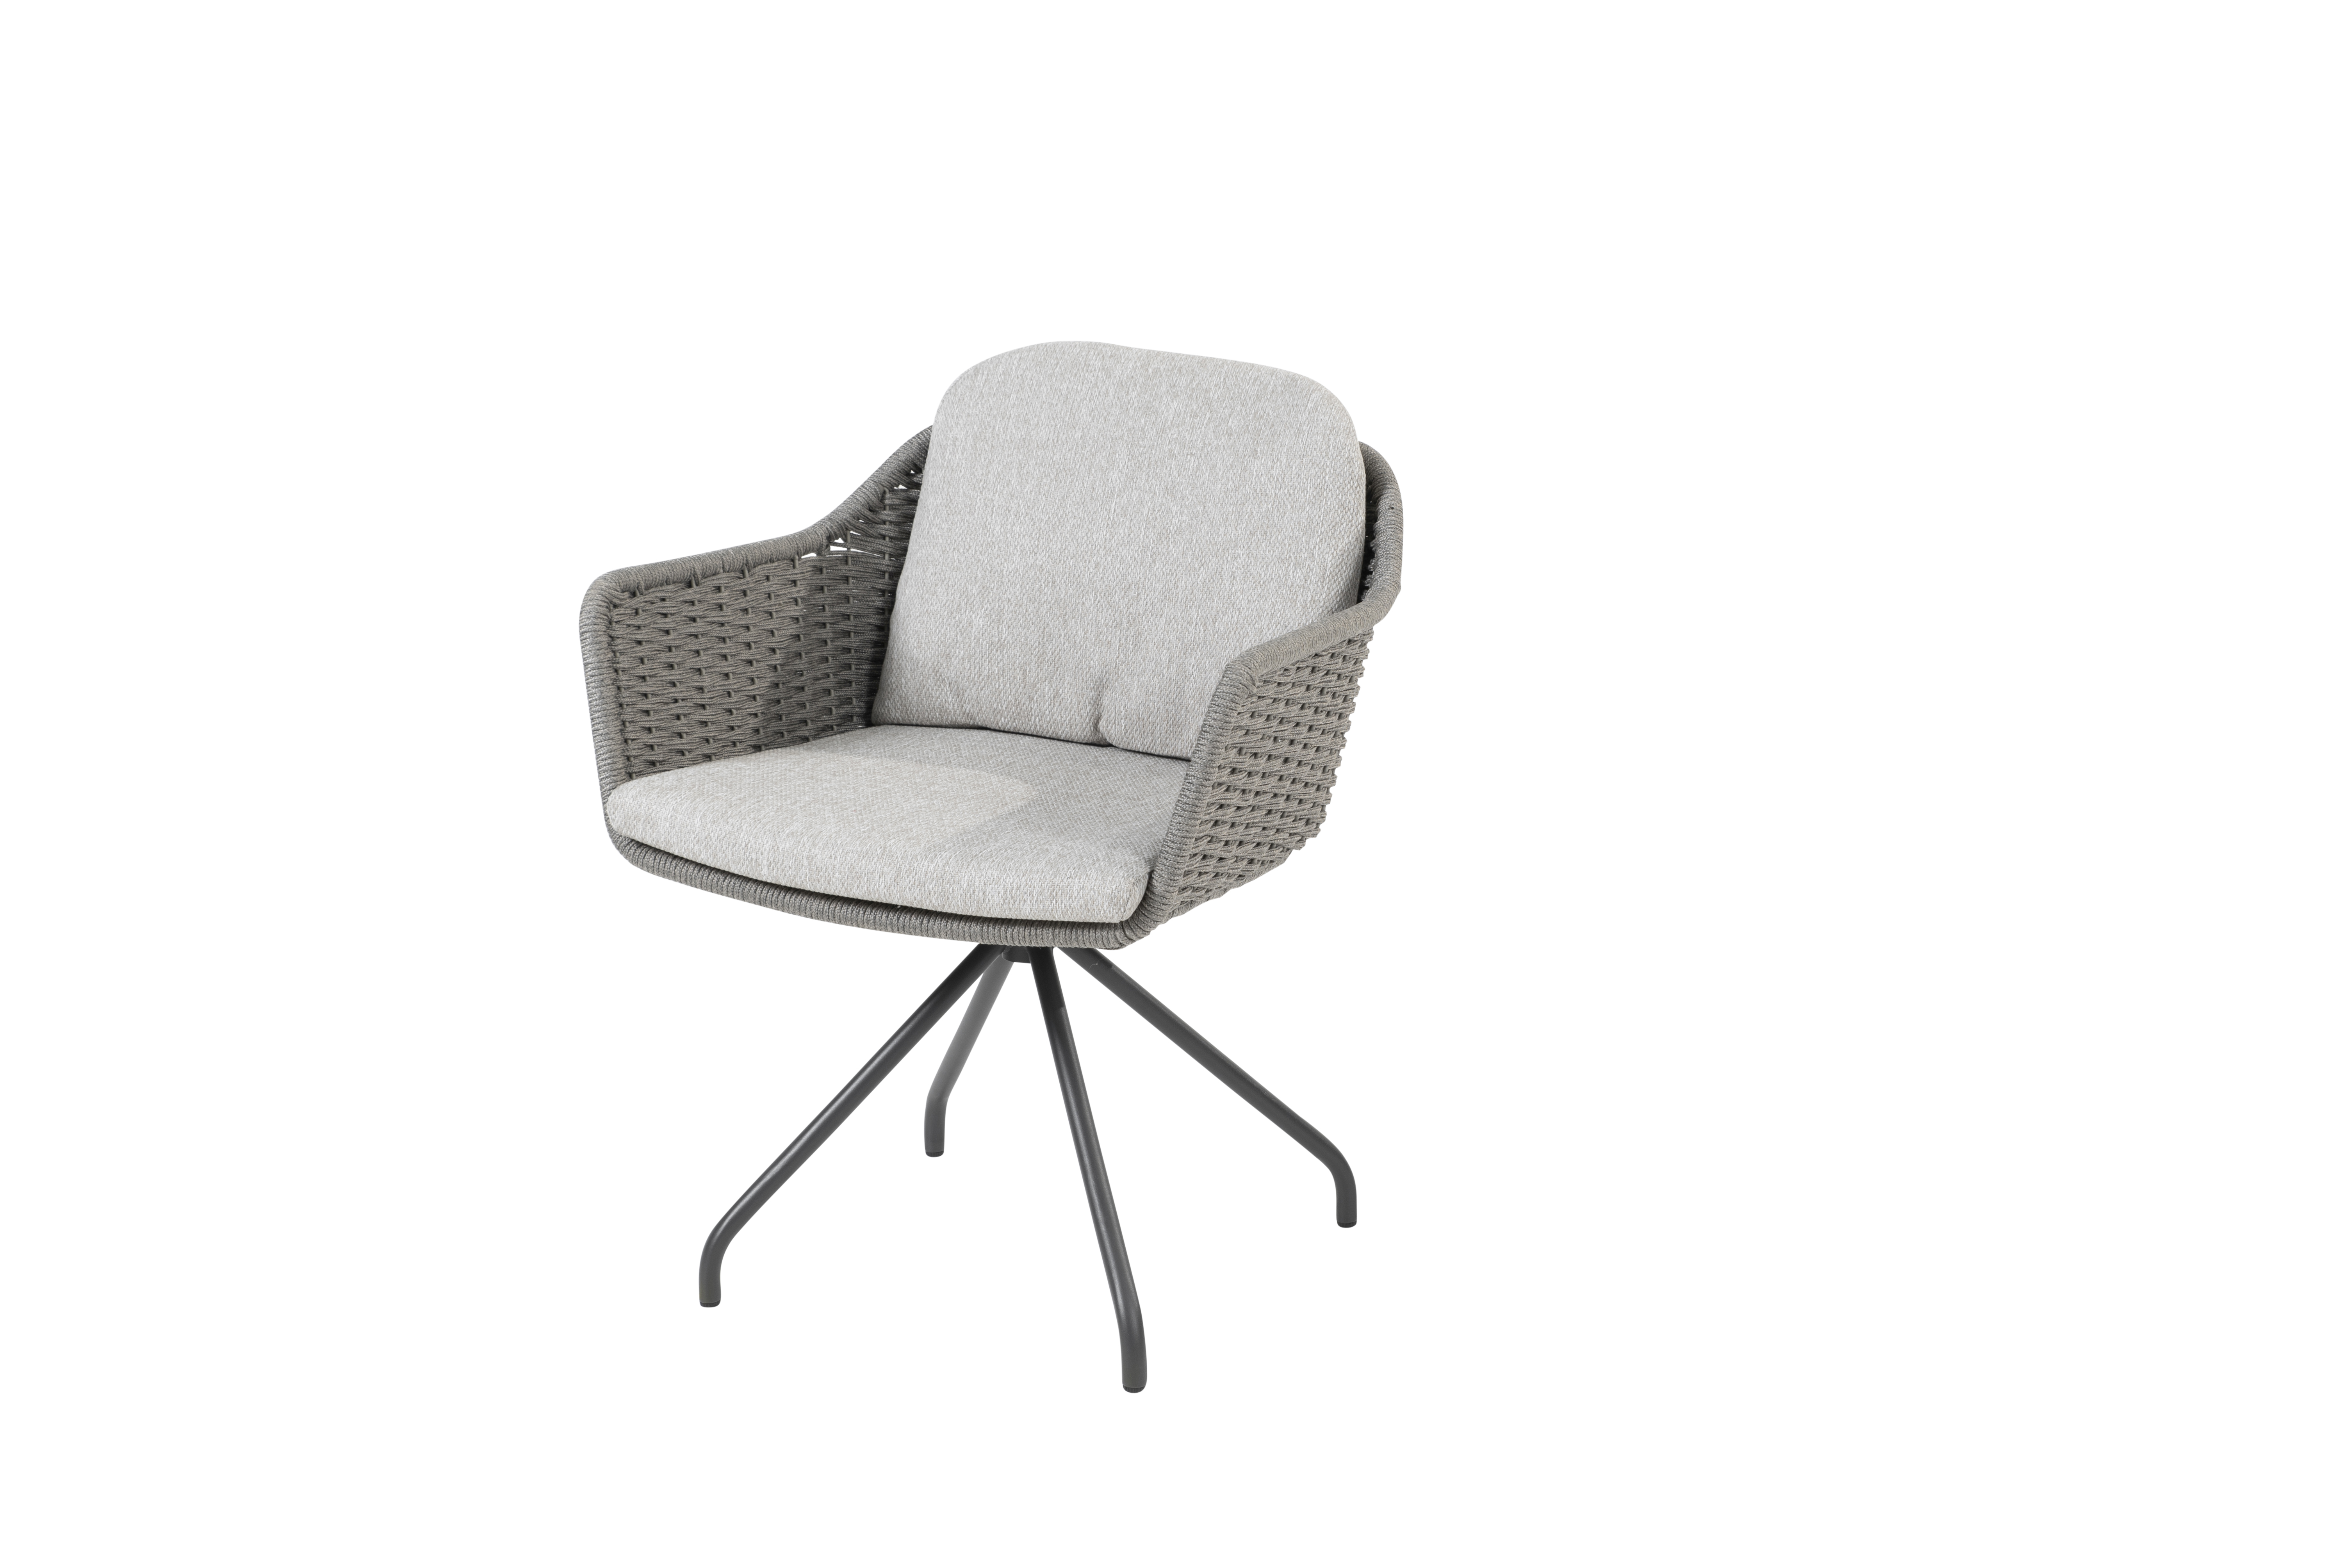 213929_ Focus dining chair silvergrey with 2 cushions 01-1